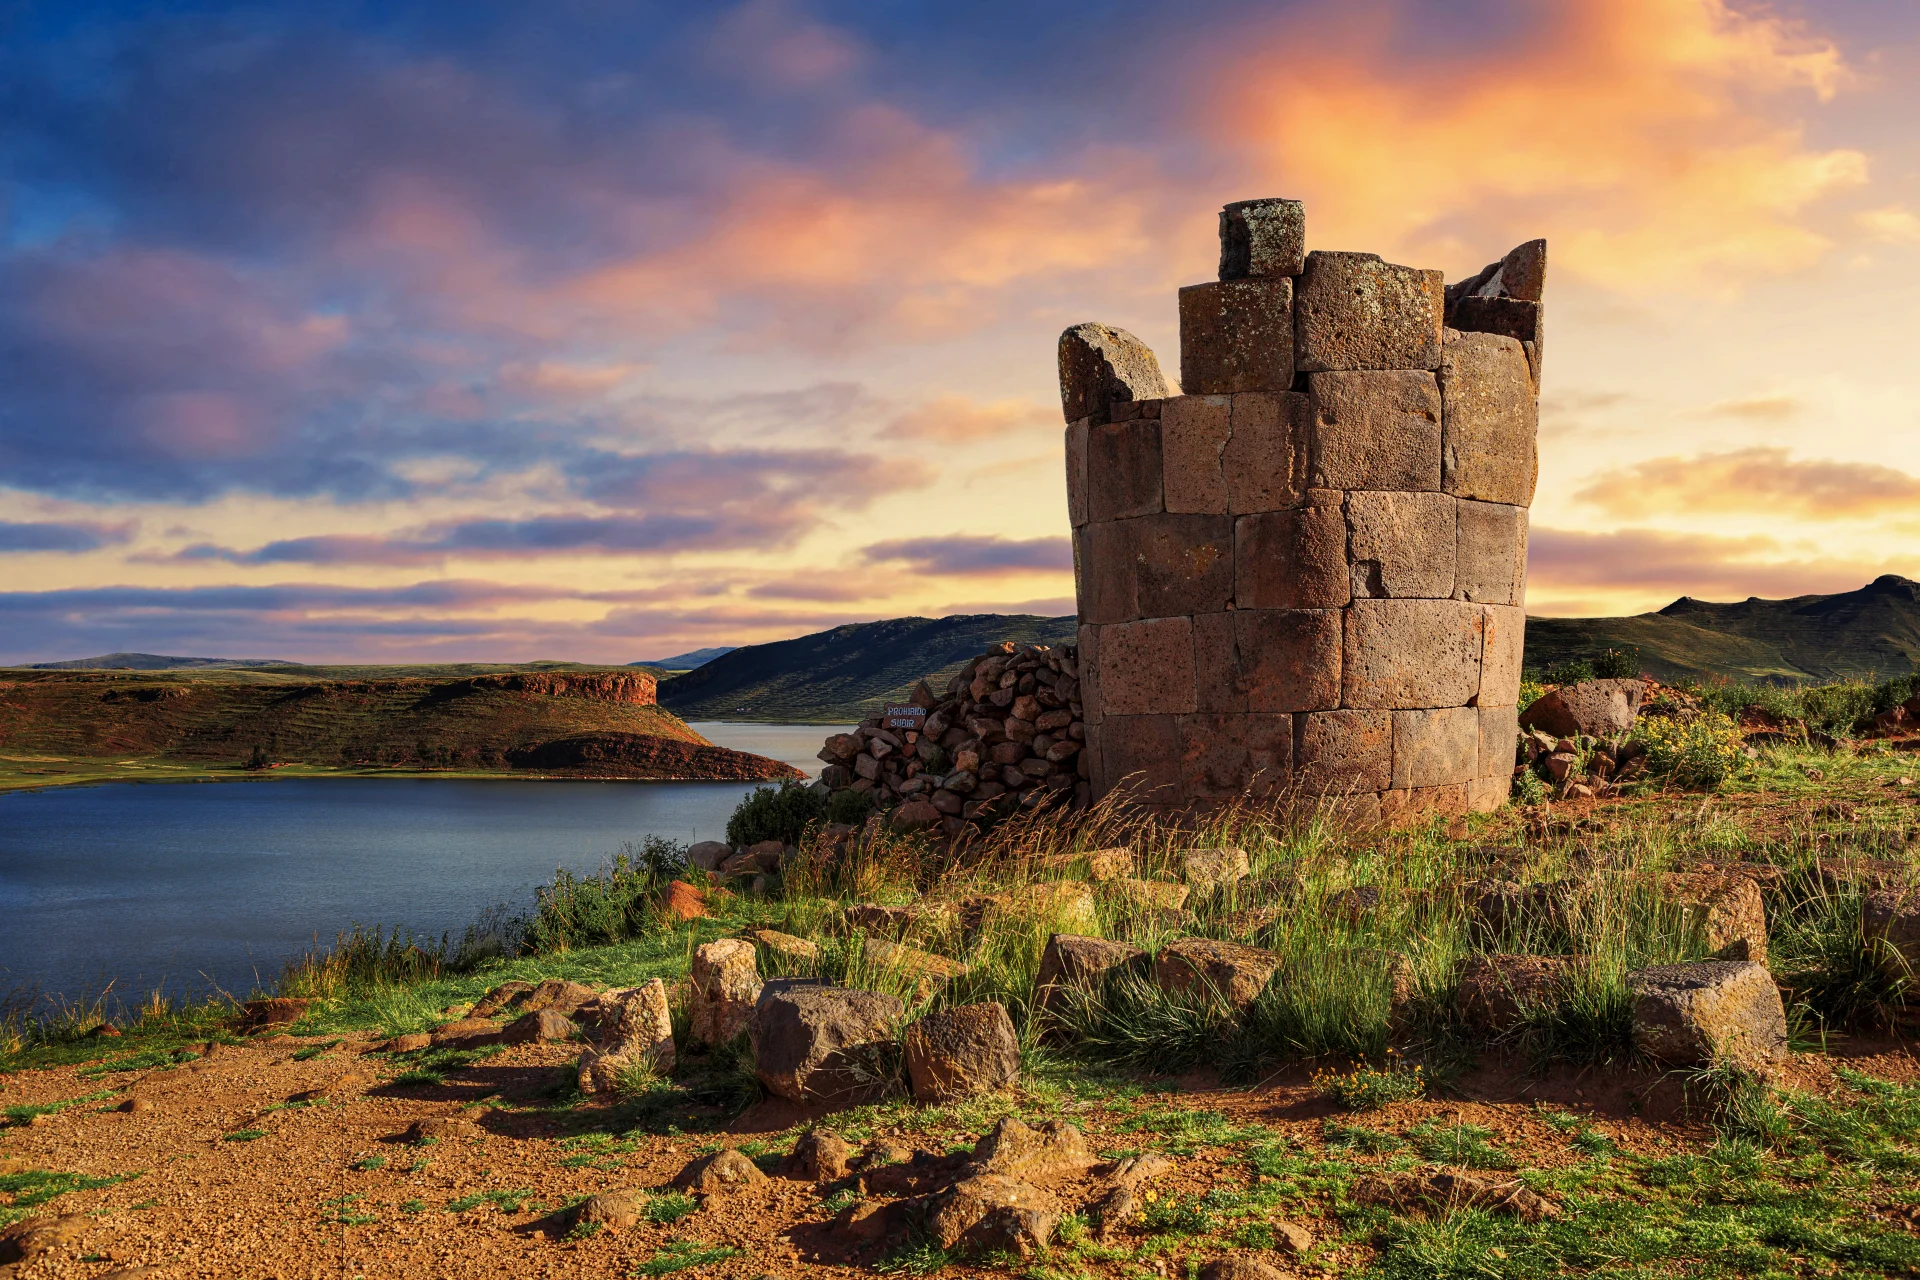 Lake Titicaca, Ancient History & Highlights of South America